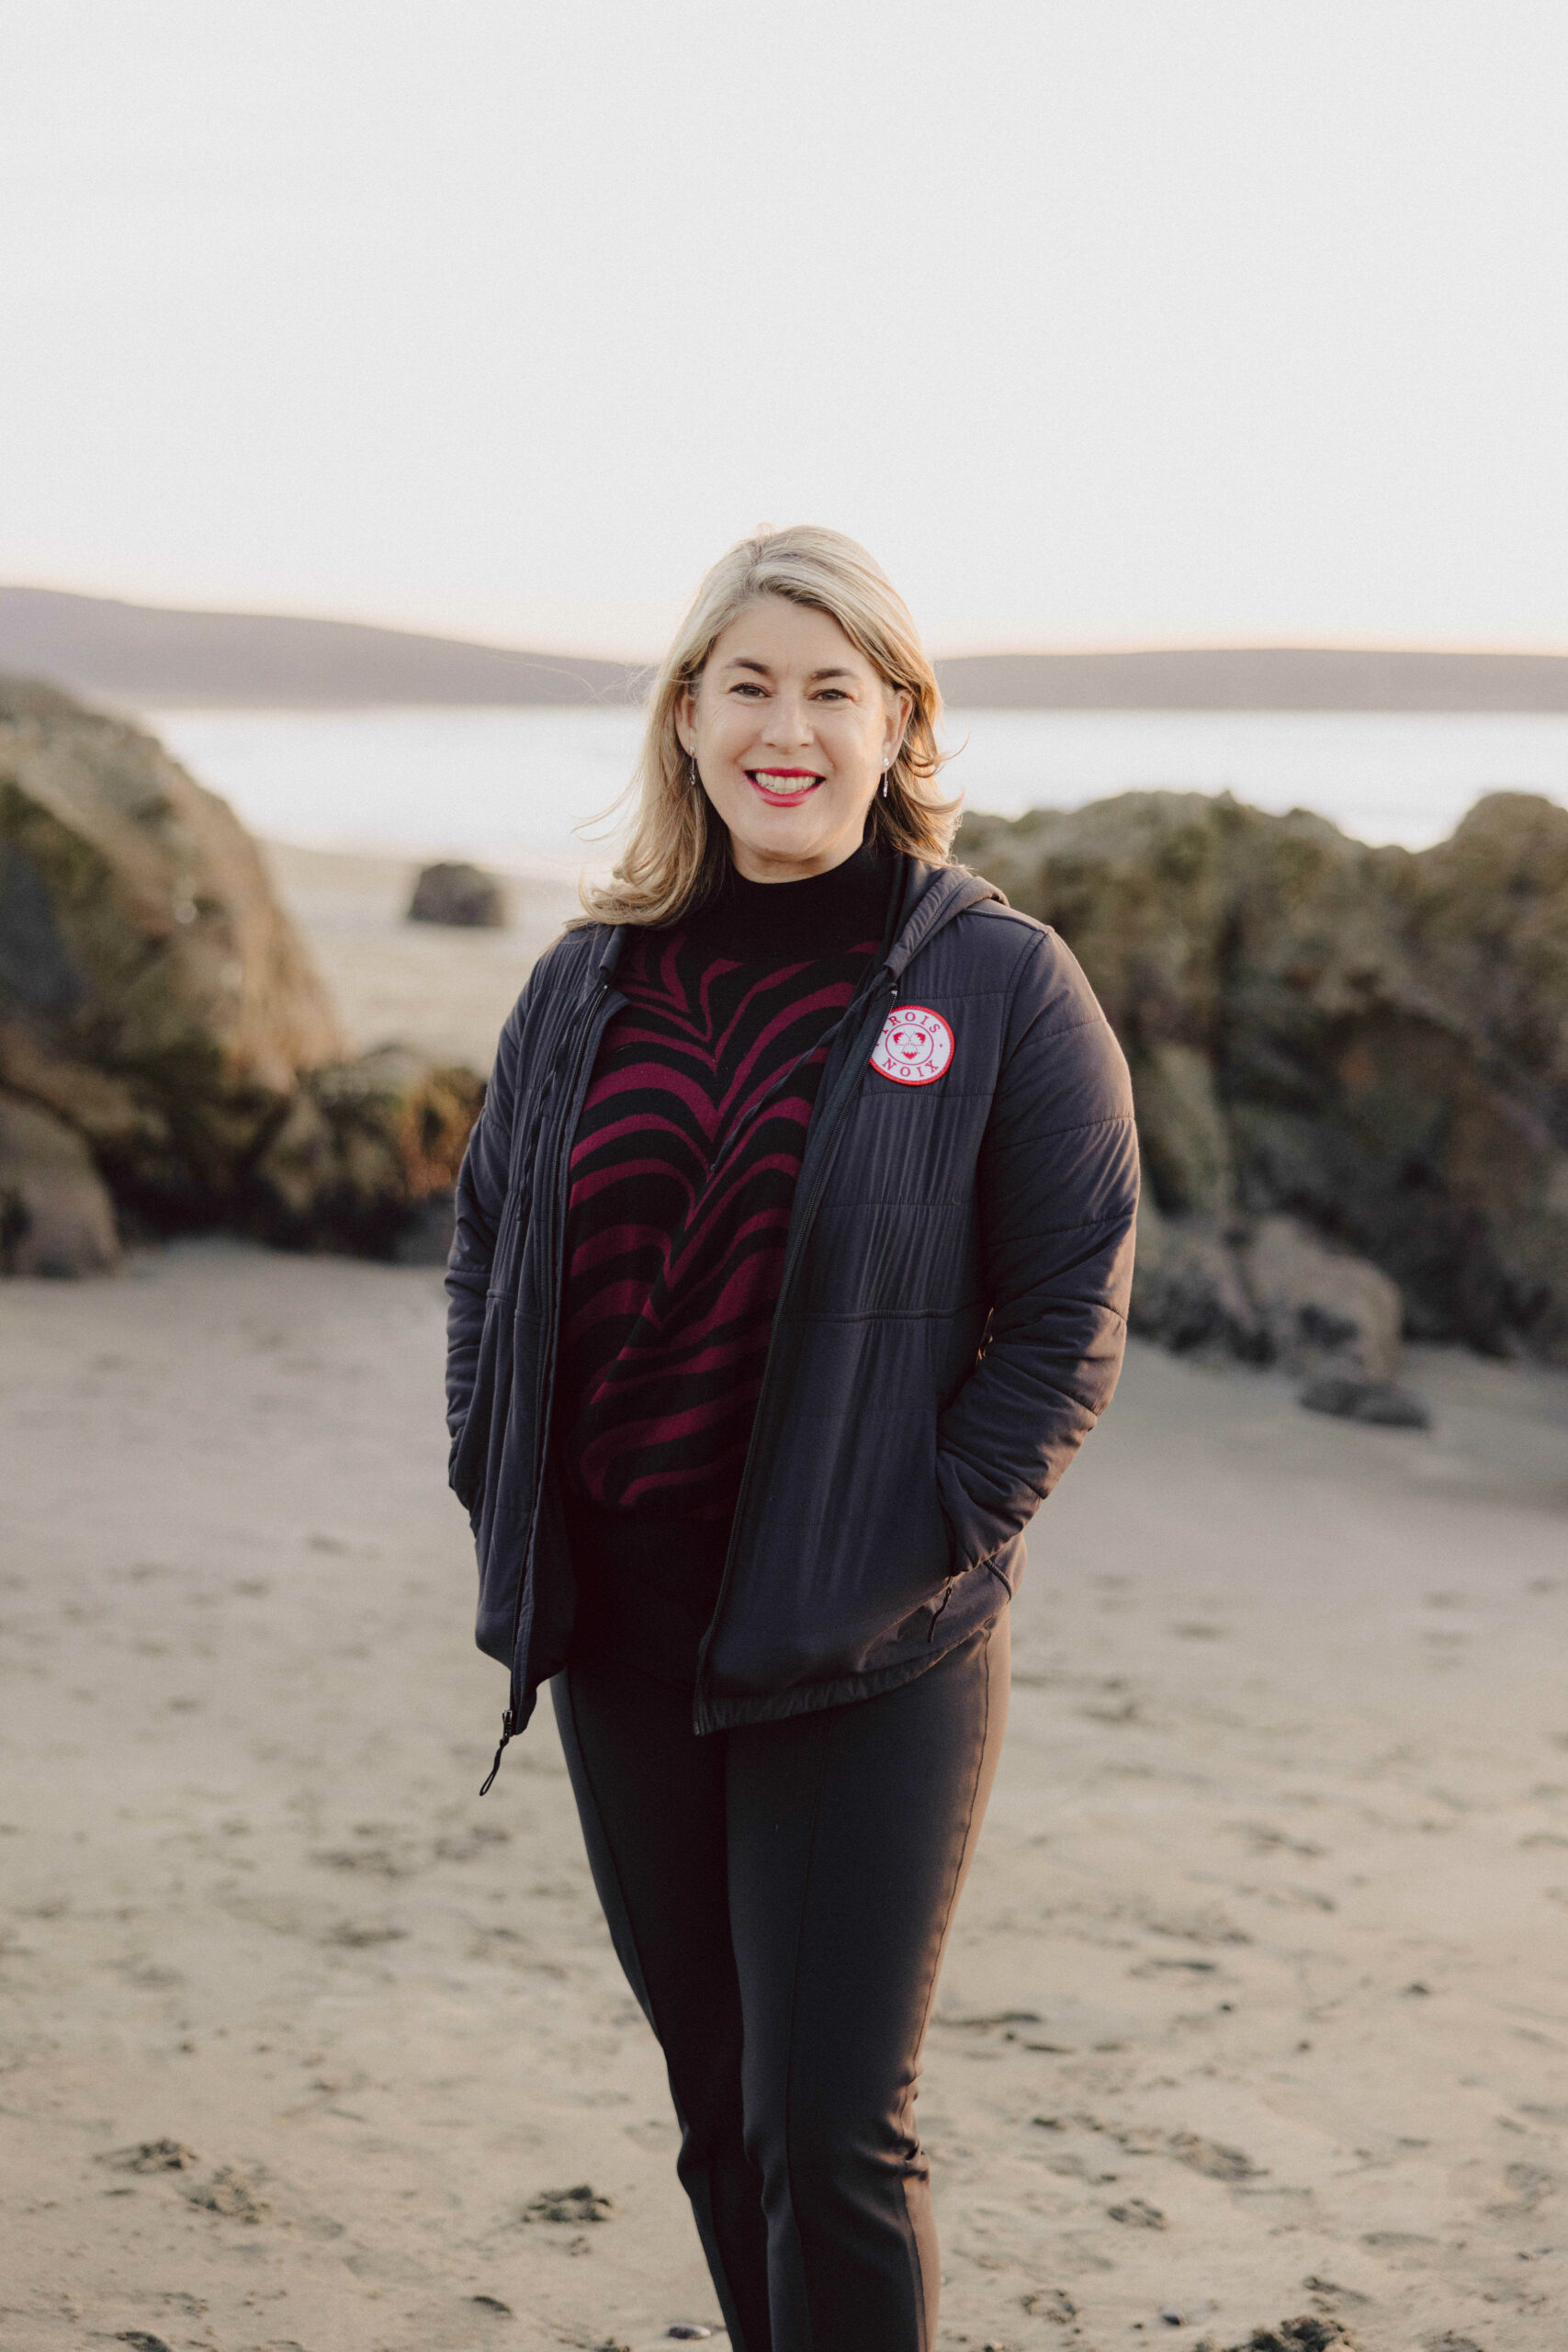 Trois Noix Founder Jaime Araujo in black jeans, a black jacket with a red and white Trois Noix patch, and a black and red sweater. She's smiling and standing with her hands in her pockets in front of rocks on Dillon Beach, CA.